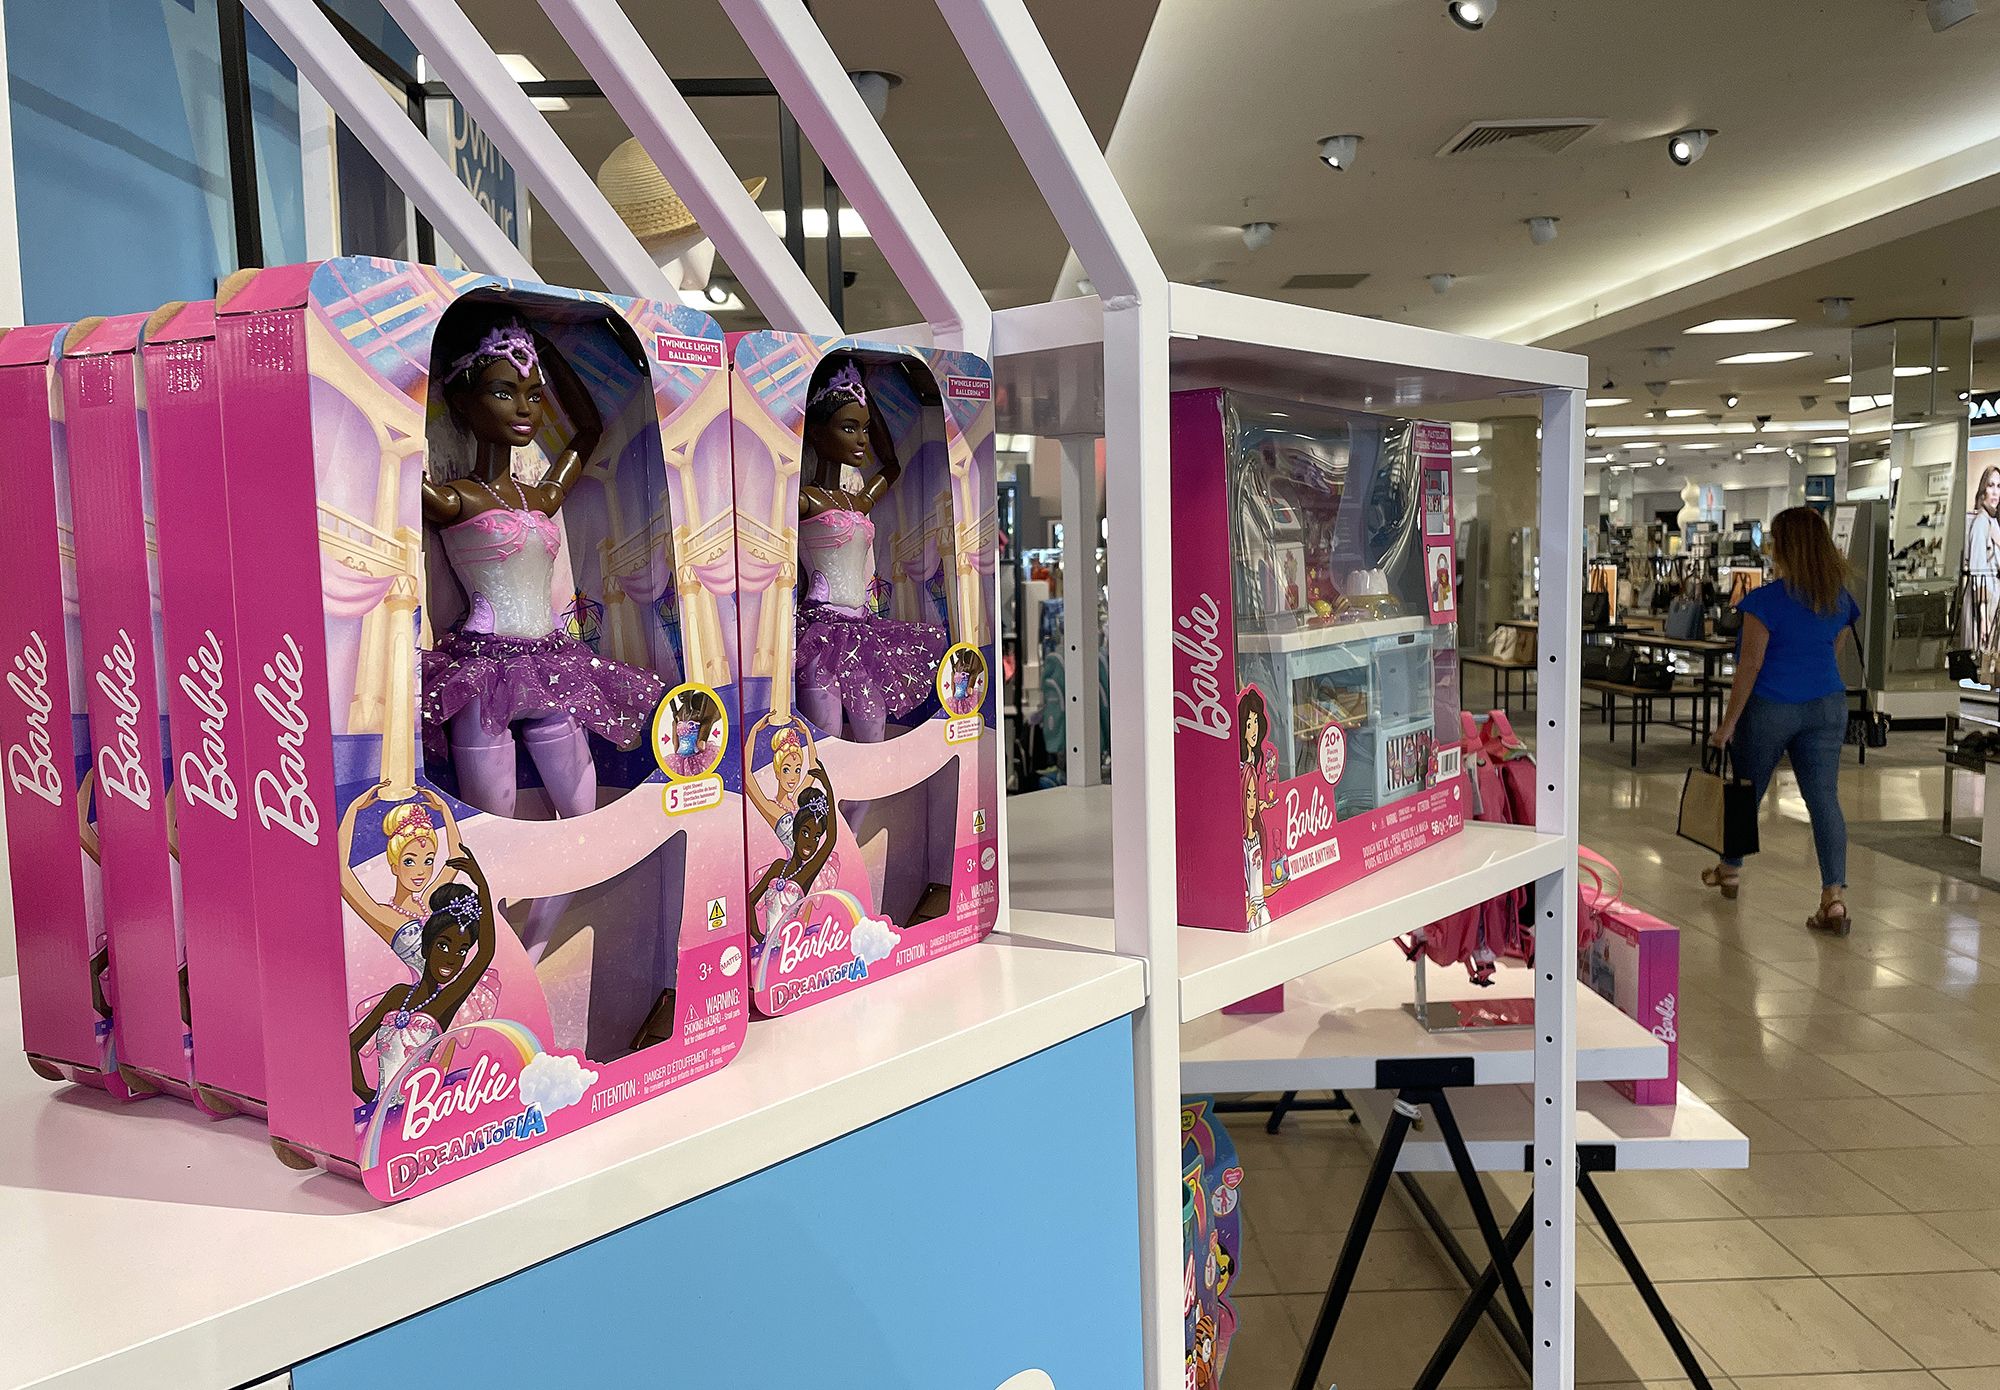 Barbie toy sales shoot up 25% after film's release